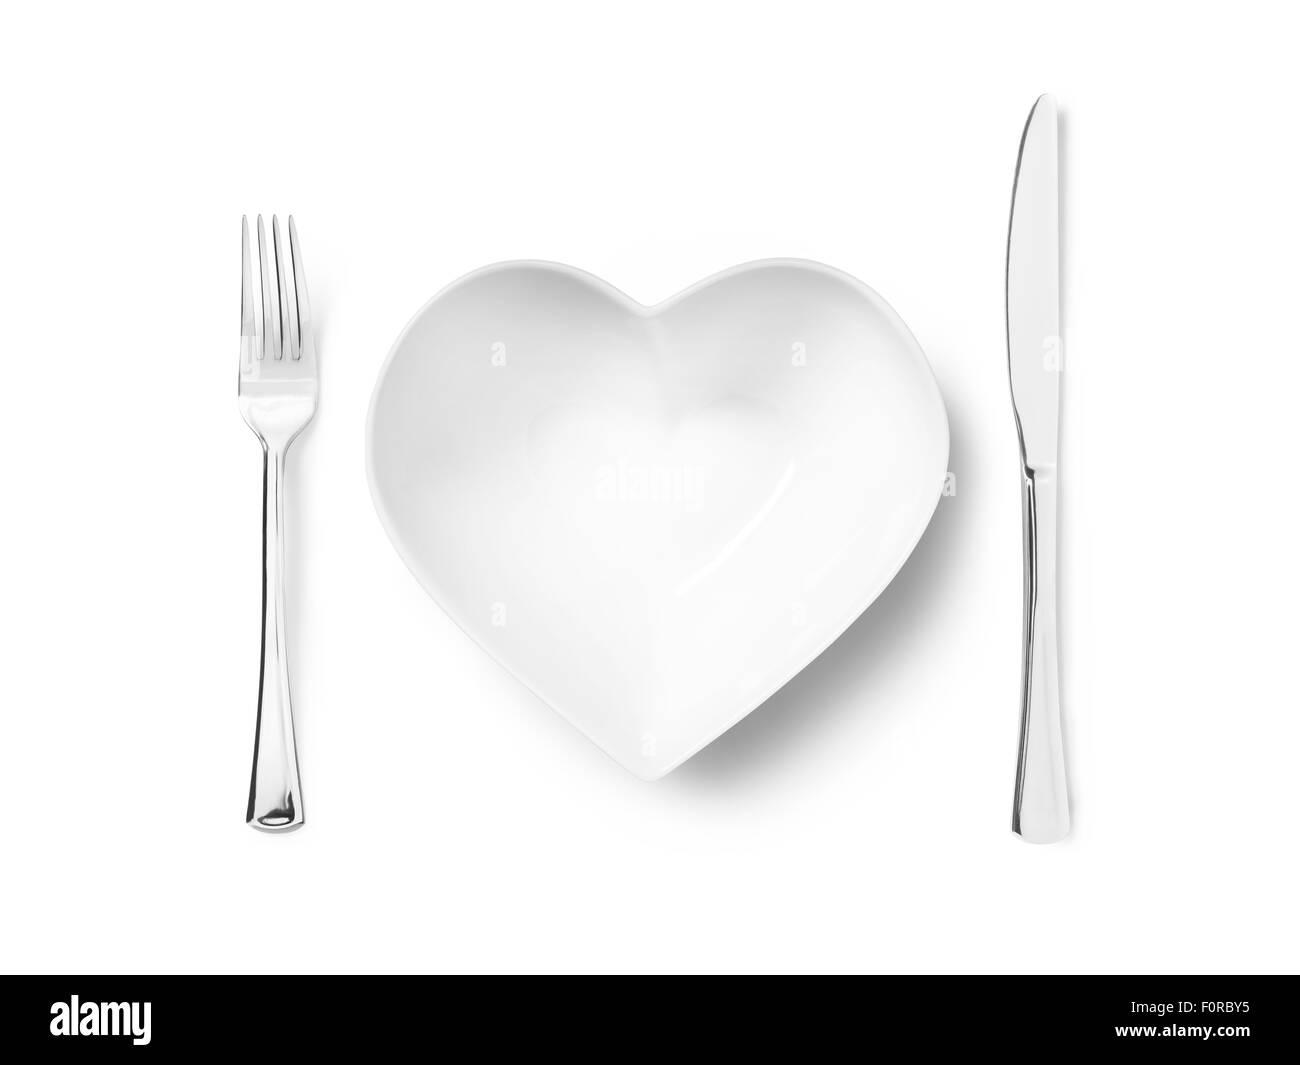 Shot of a heart shaped plate or bowl with a silver knife and fork implying a love of healthy eating. The image has copy space an Stock Photo